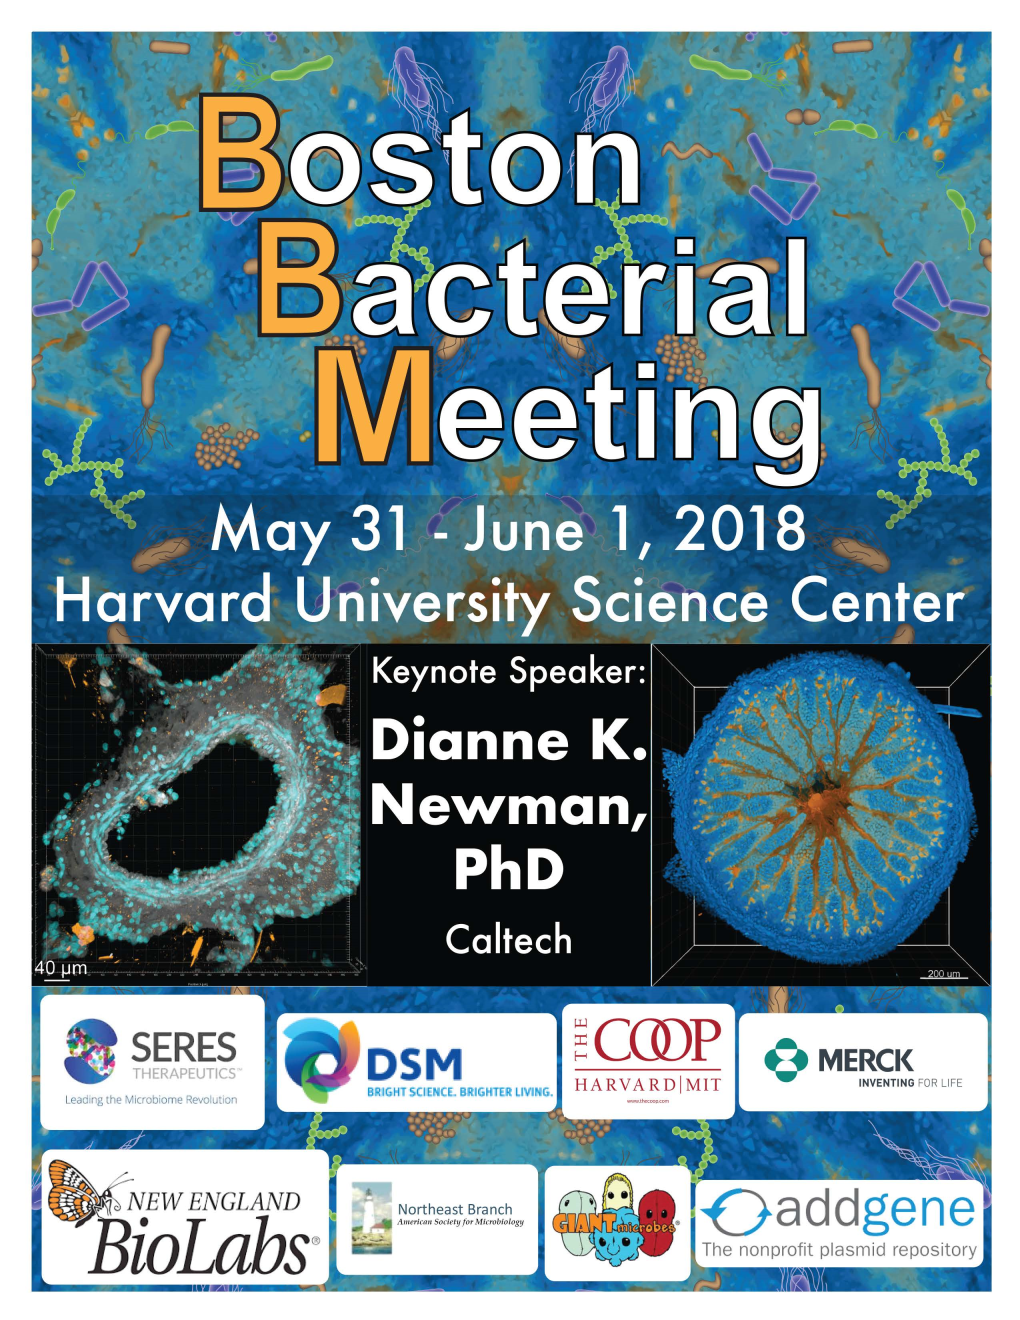 Iolabs· D Addgene 2018 Boston Bacterial Meeting - Schedule and Introduction